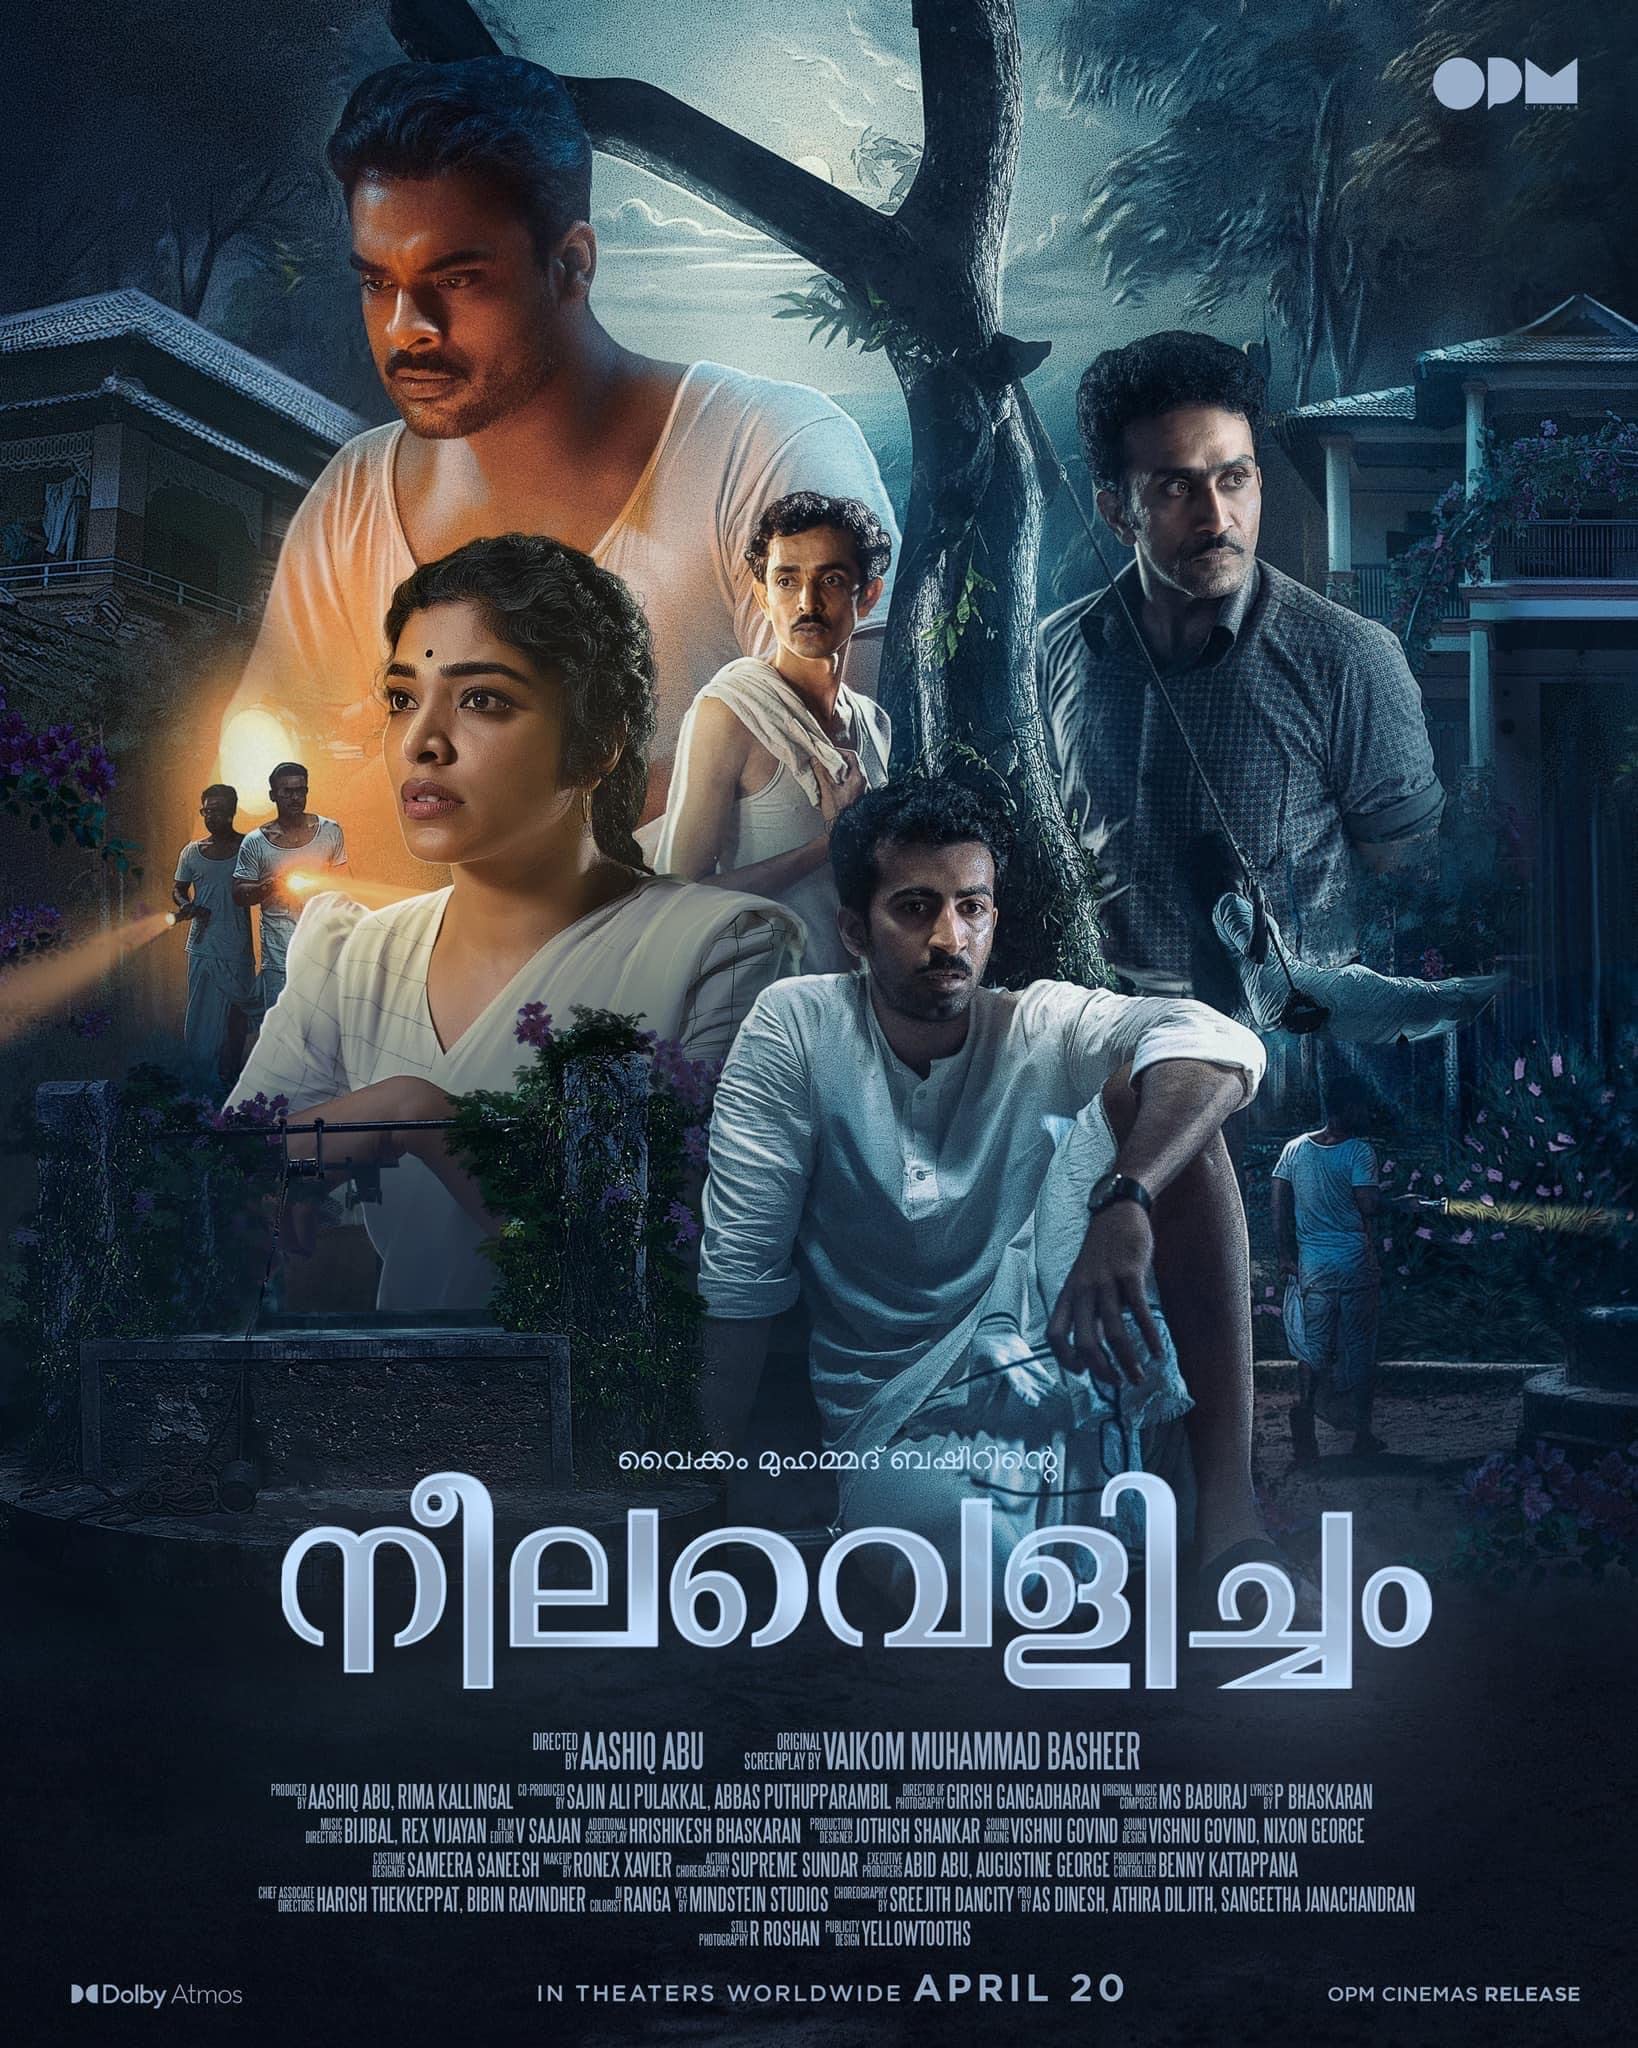 Neelavelicham (2023) is a horror thriller film directed by Aashiq Abu